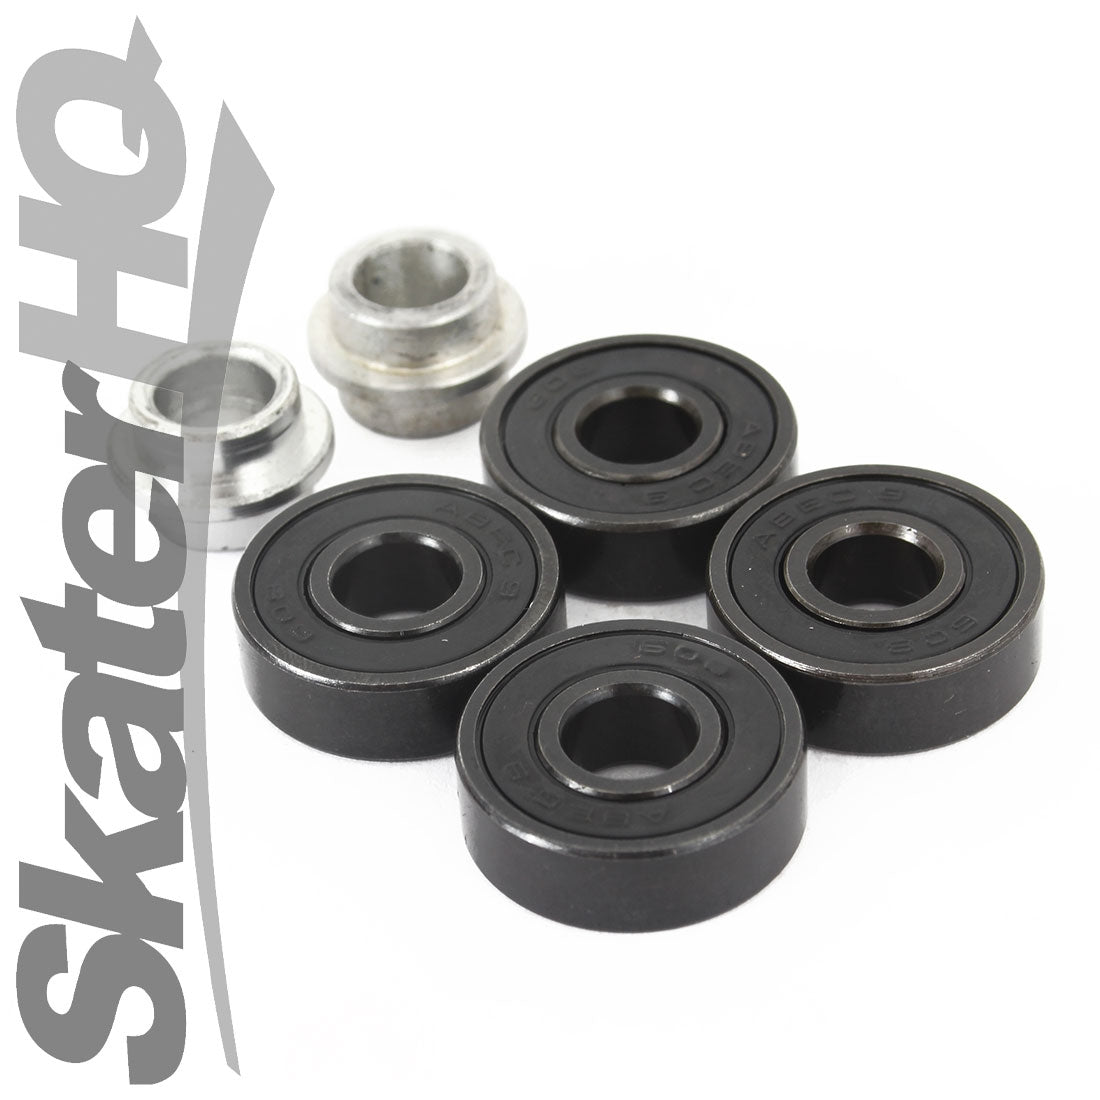 Paragon Abec 9 Bearing and Spacers 4pk Scooter Hardware and Parts